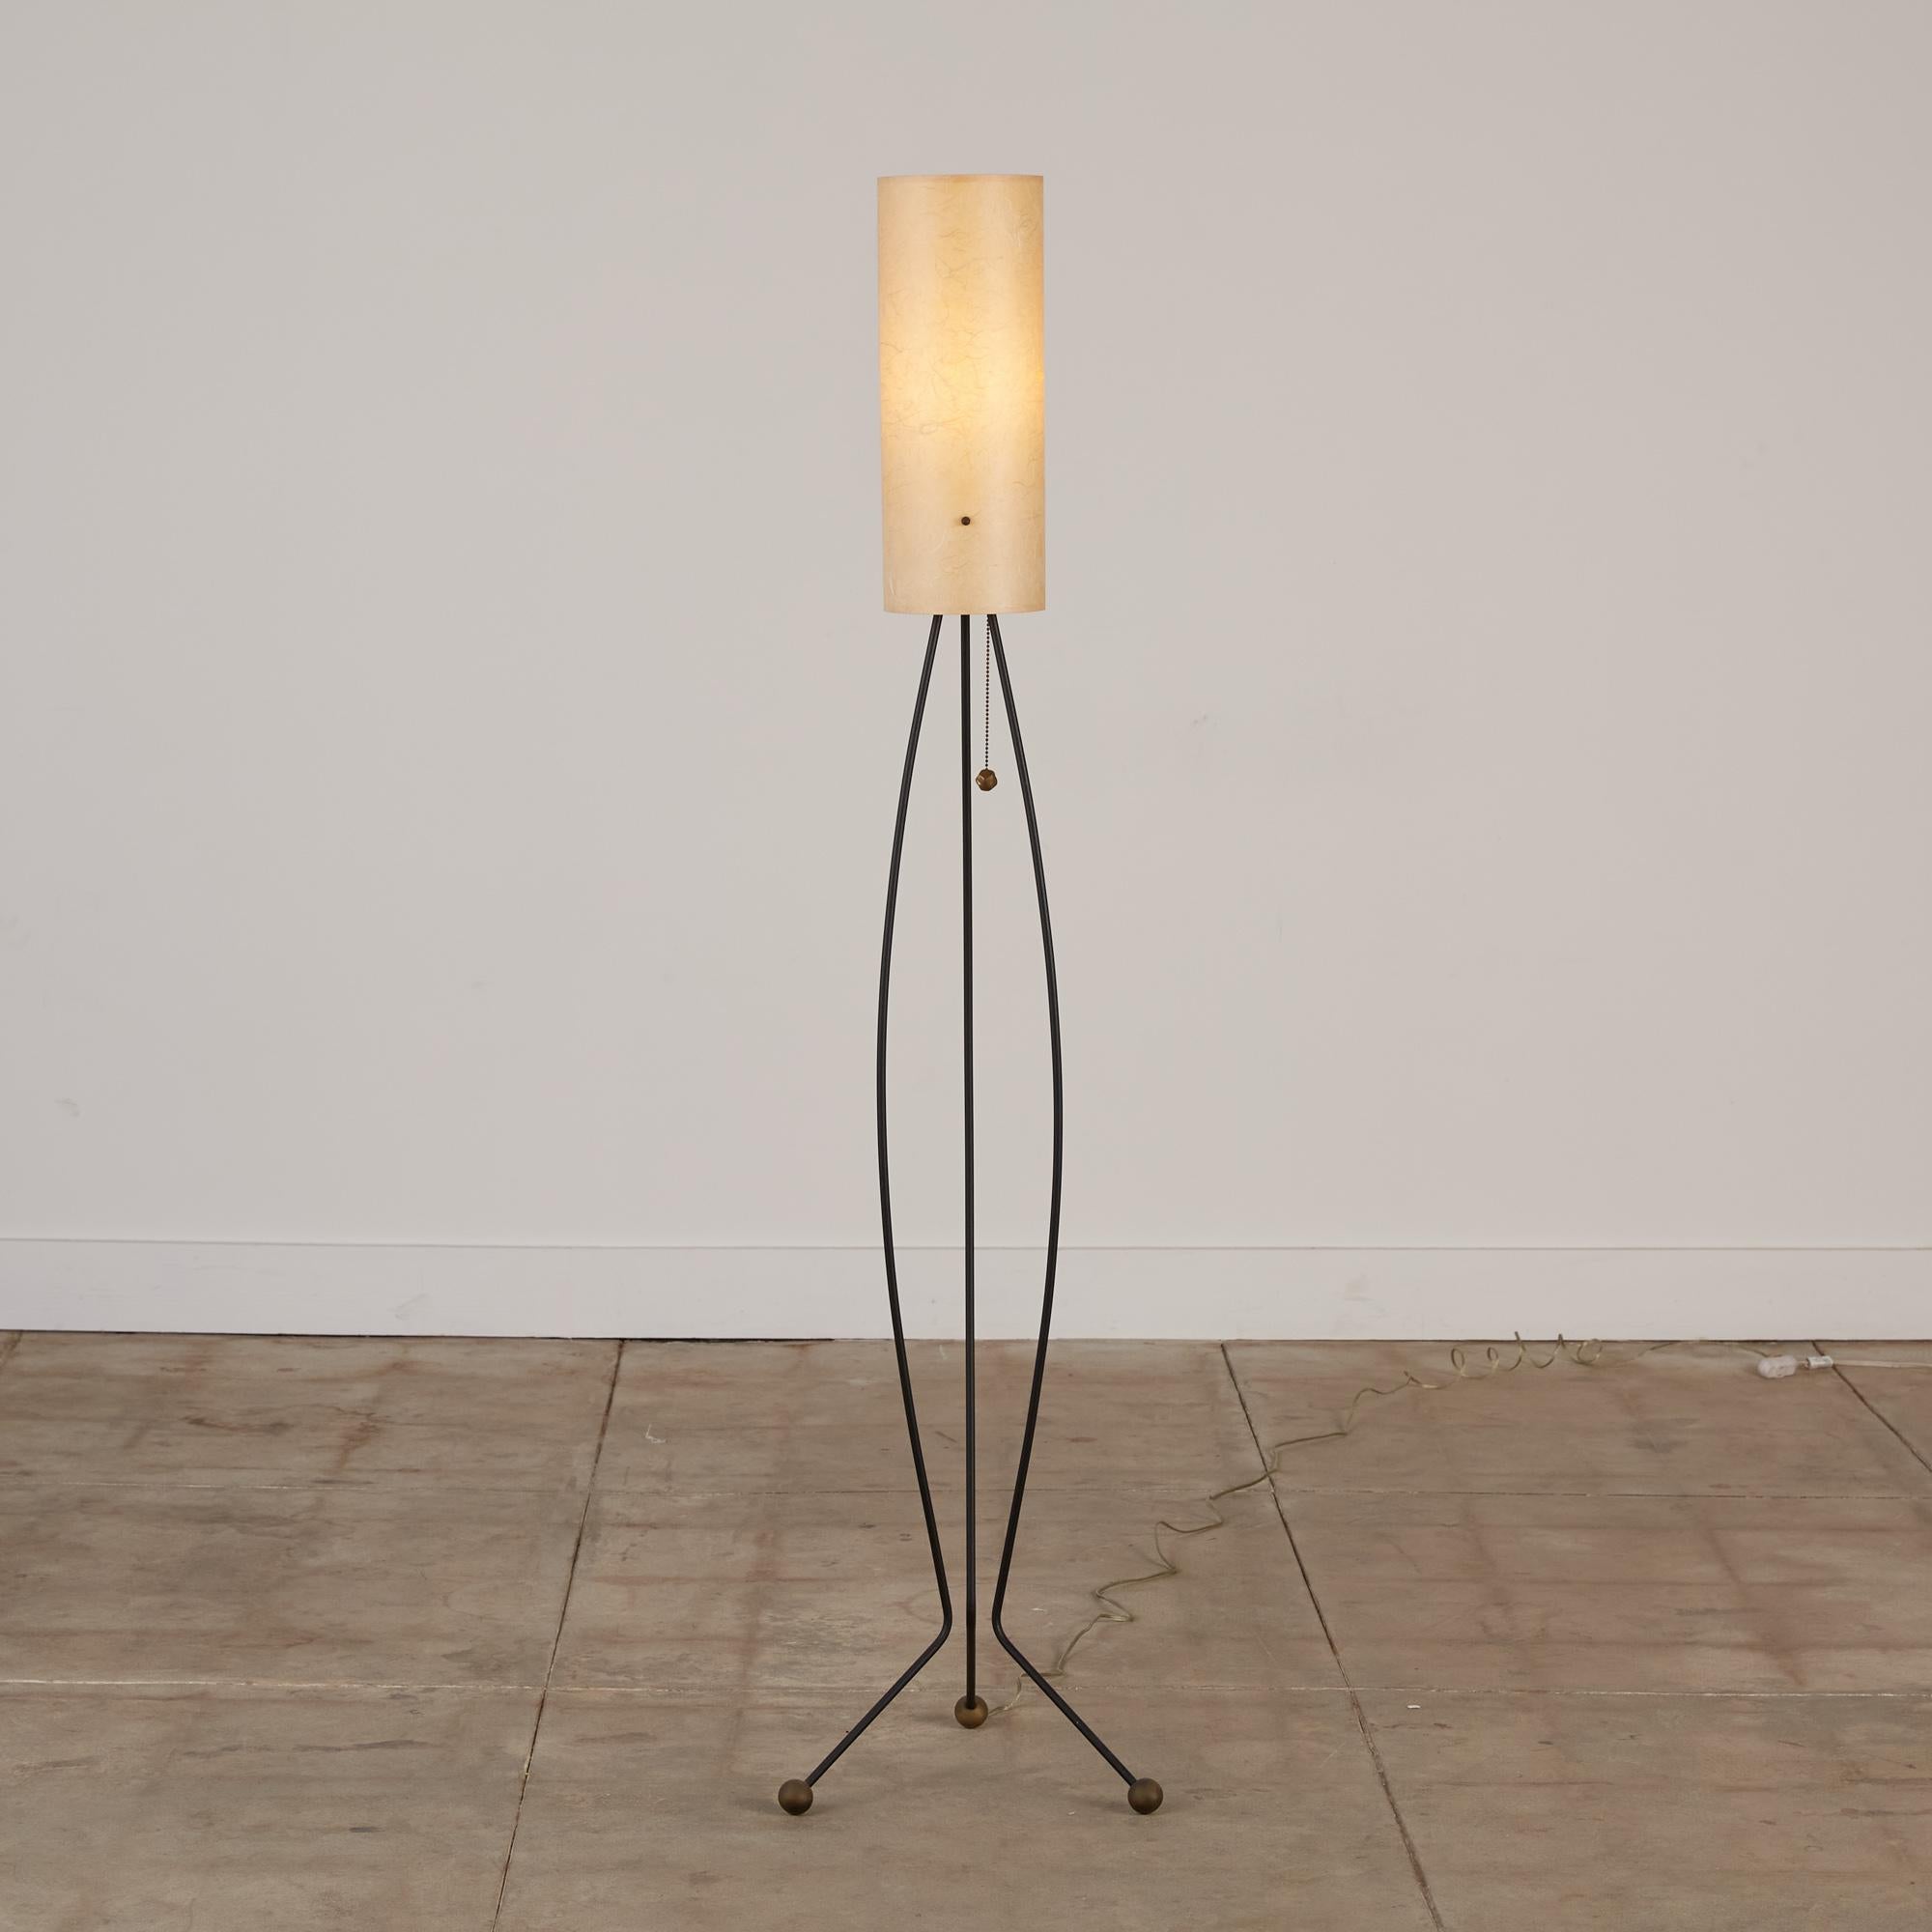 This tripod floor lamp features a patina most people wait decades to achieve. Each delicate leg curves down the length of the lamp and is finished with a brass footing. The paper pulp lamp shade gives off a warm golden toned light and is secured by